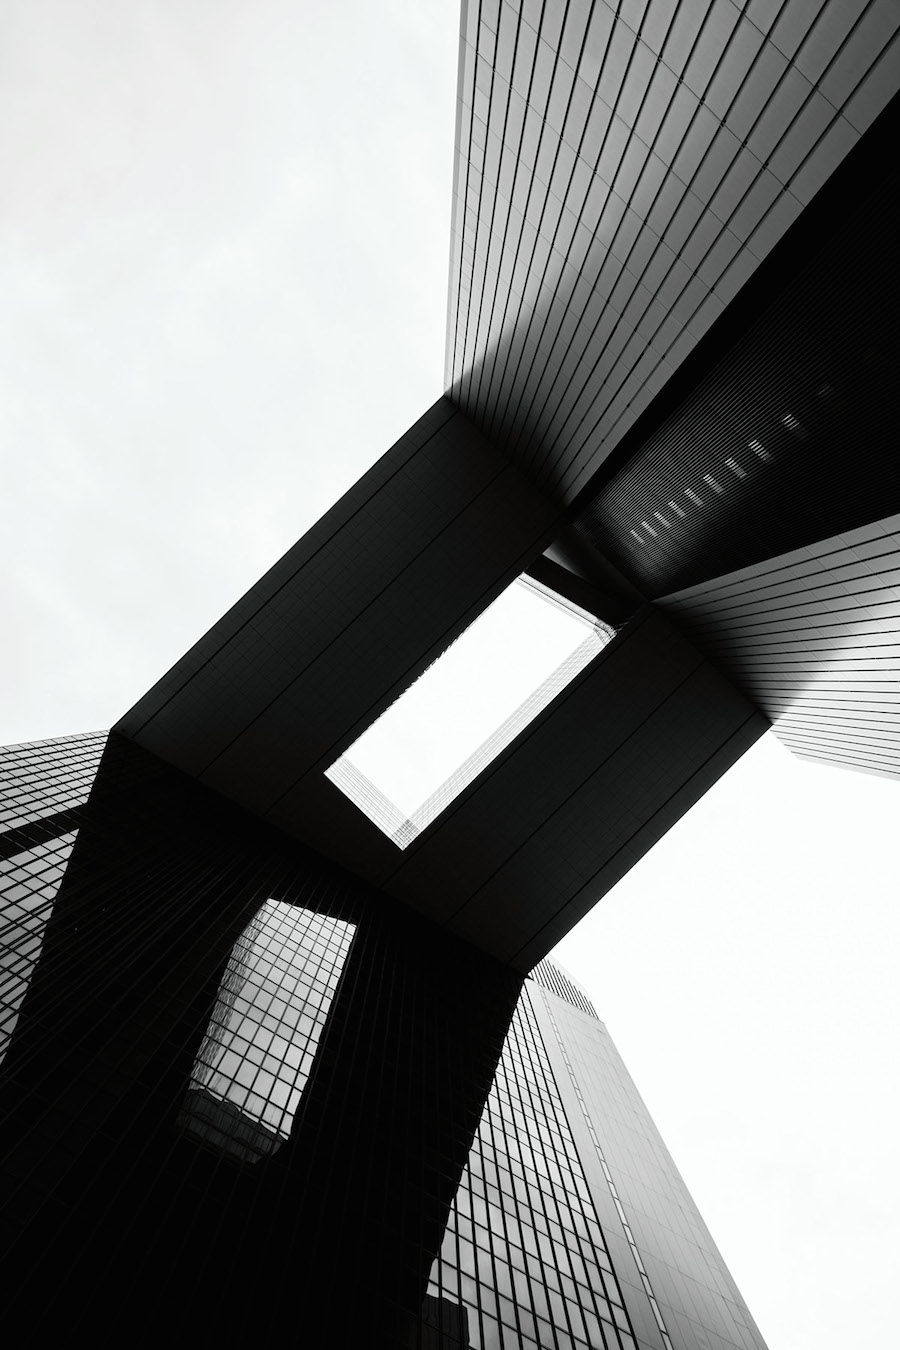 Uncluttered Black and White Architecture Photography-13